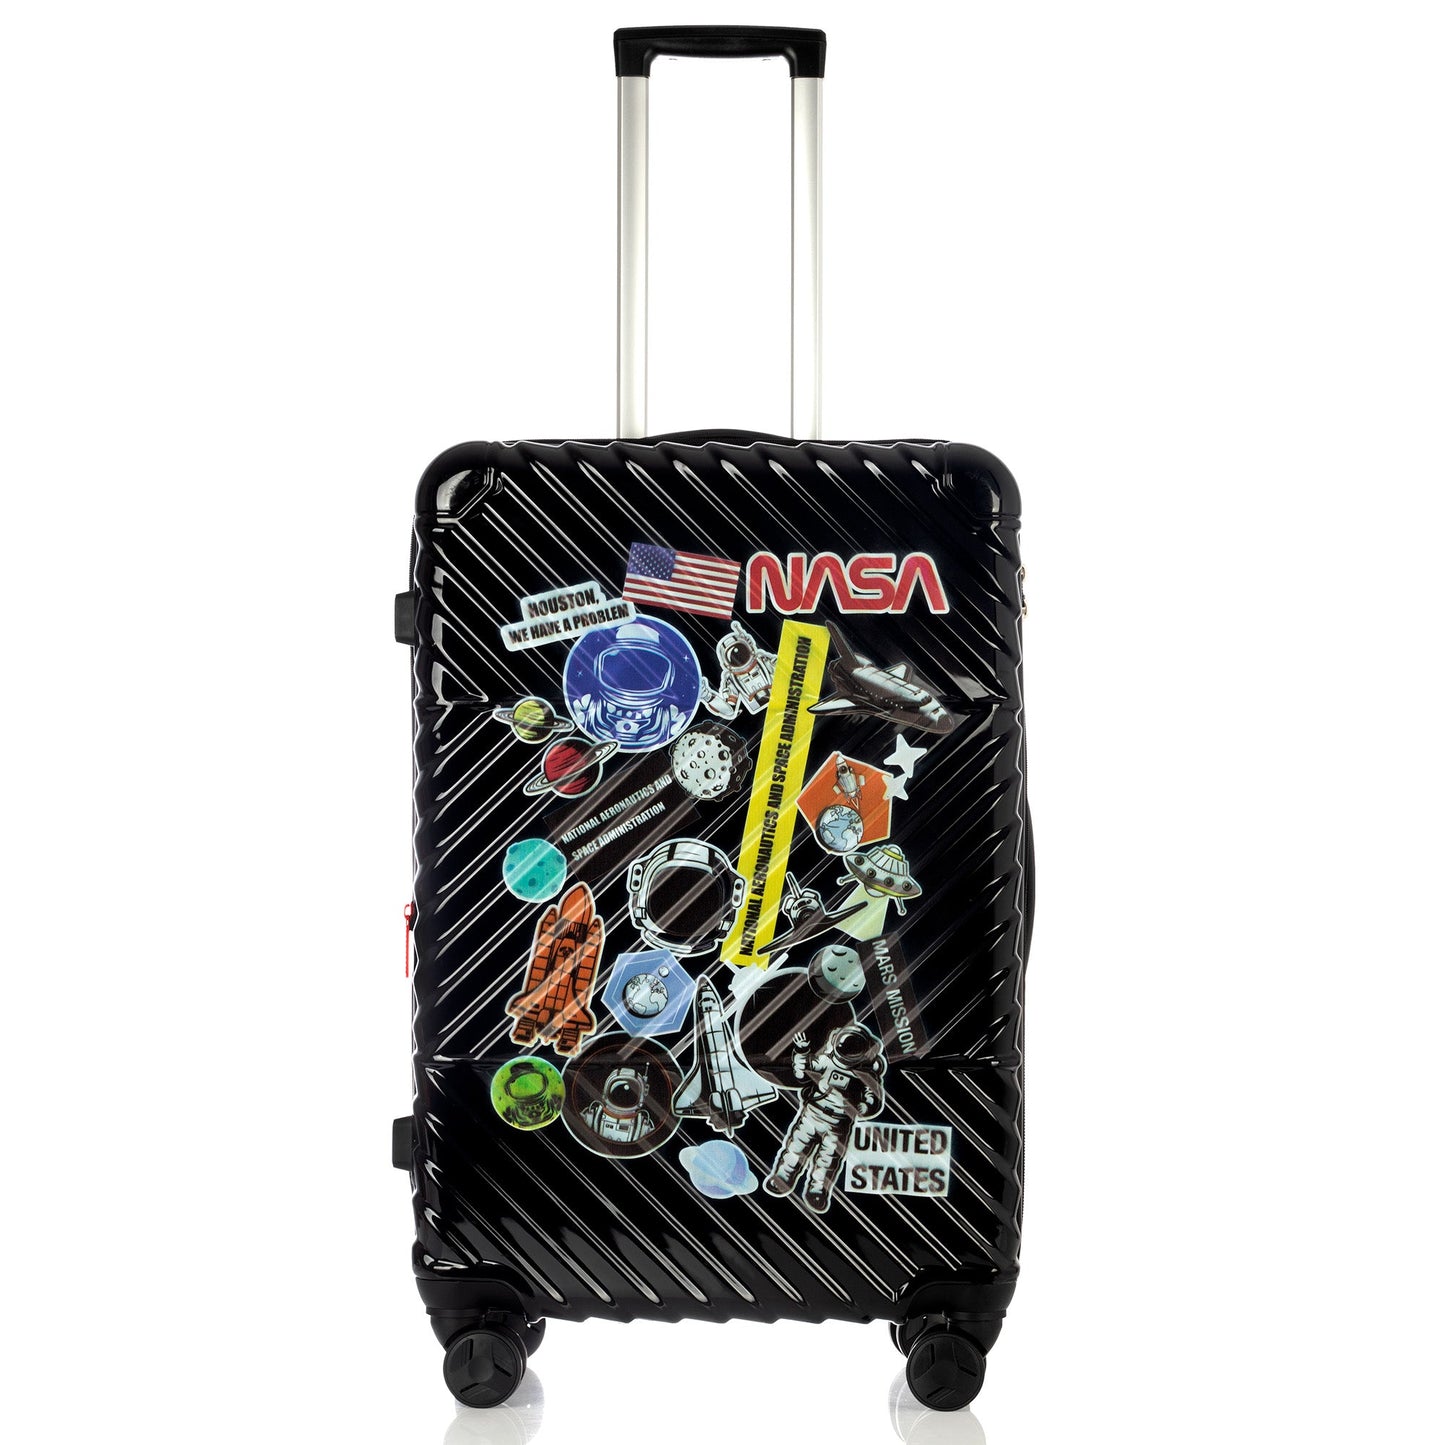 Mission Patches Collection Black Luggage(21/26/29")